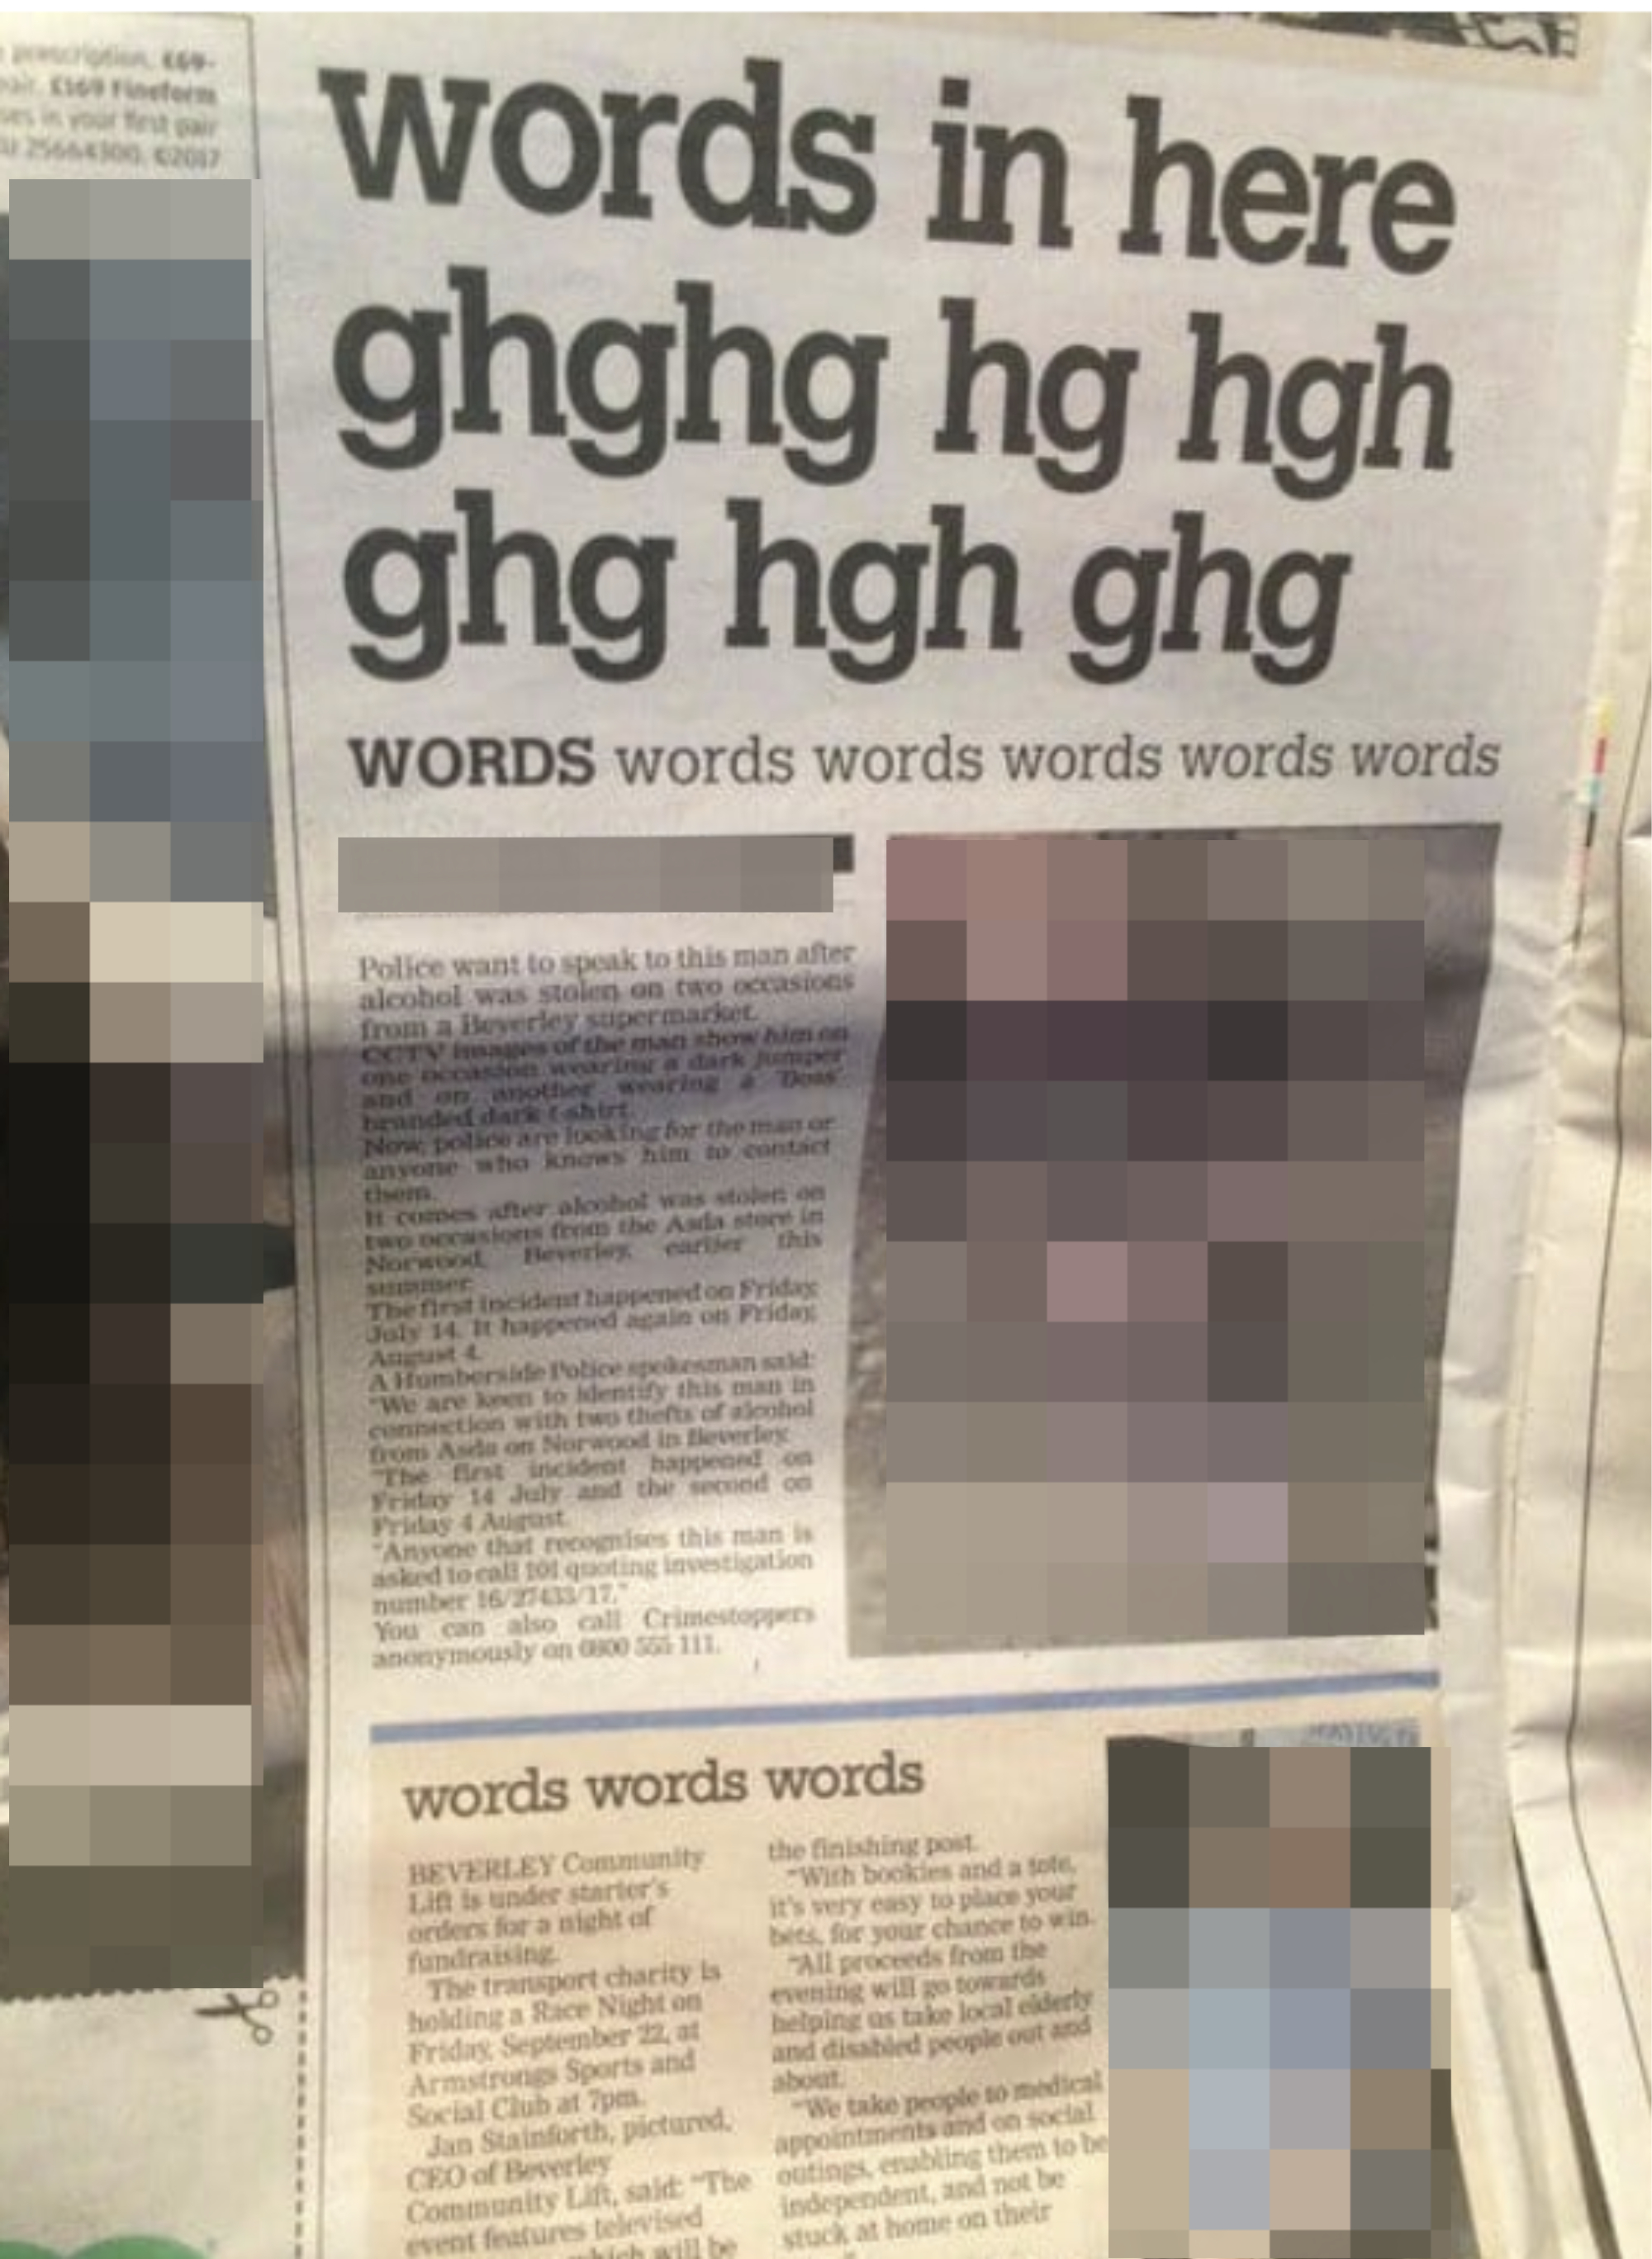 A newspaper that has not been edited to remove filler headlines and gibberish such as &quot;words in here ghghg hg hgh ghg hgh ghg&quot; and &quot;words words words&quot;